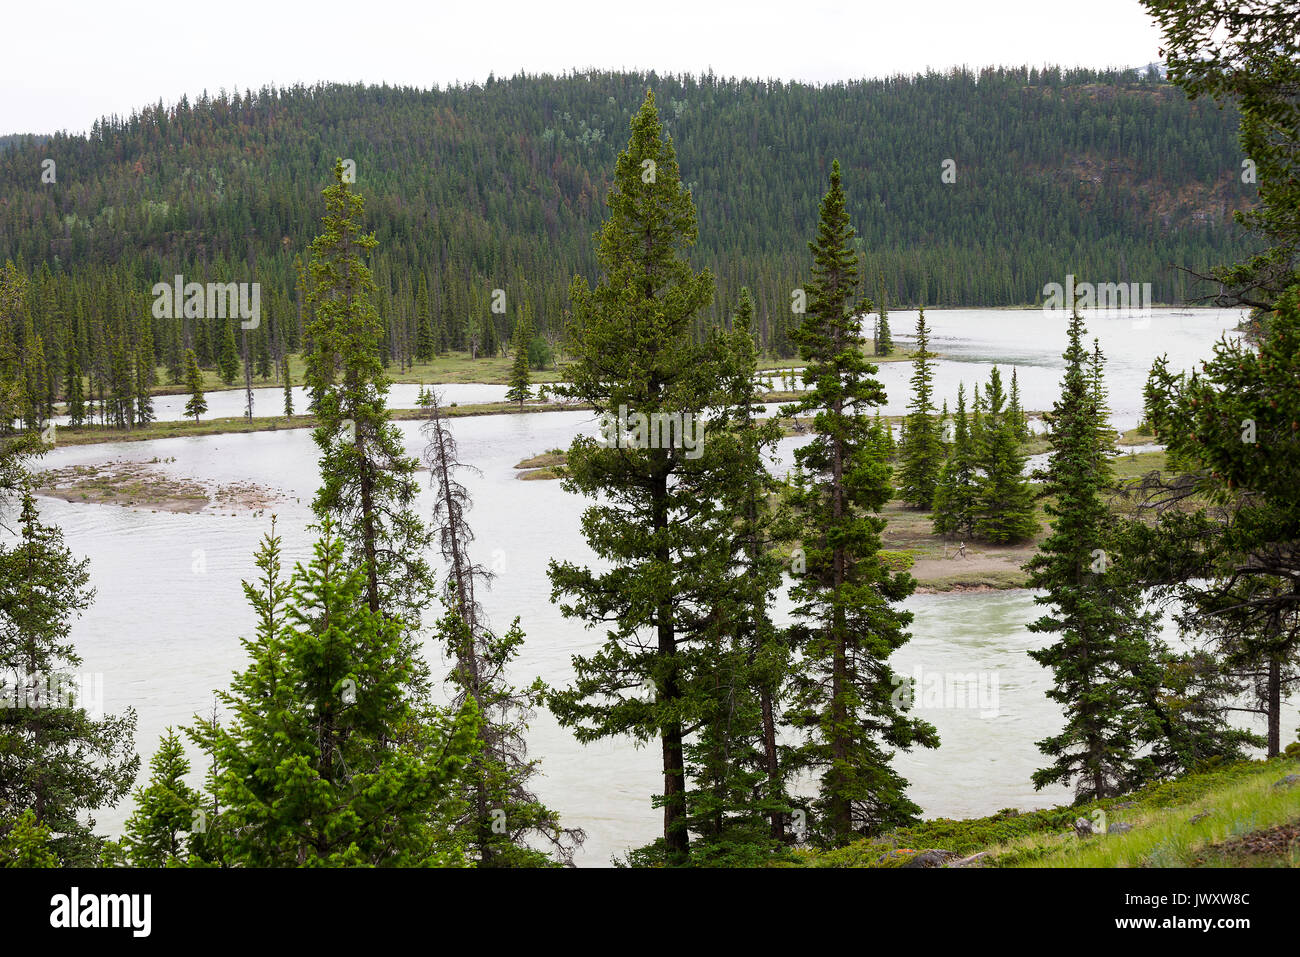 The Beautiful Athabasca River From The Grounds of The Tekarra Lodge Resort near Jasper Alberta Canada Stock Photo